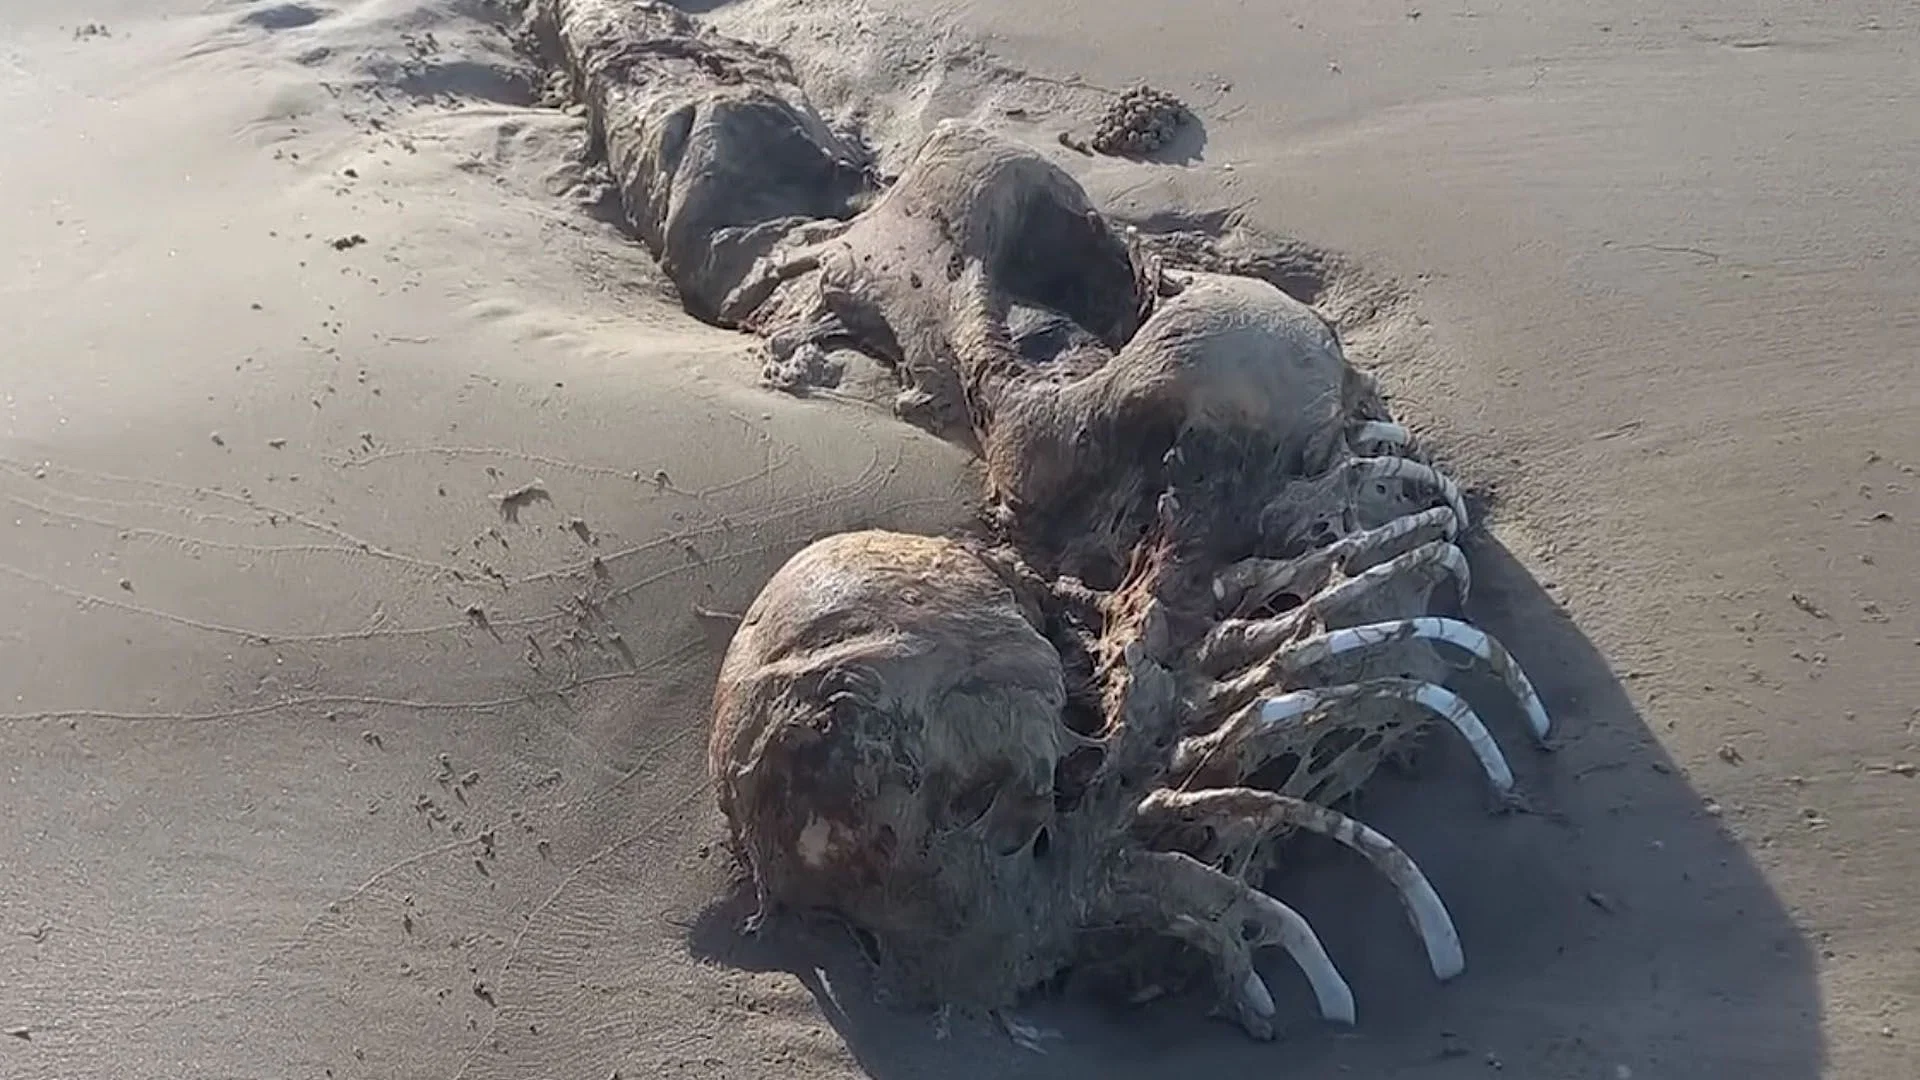 Mysterious Mermaid Skeleton Washes Up On Queensland Beach